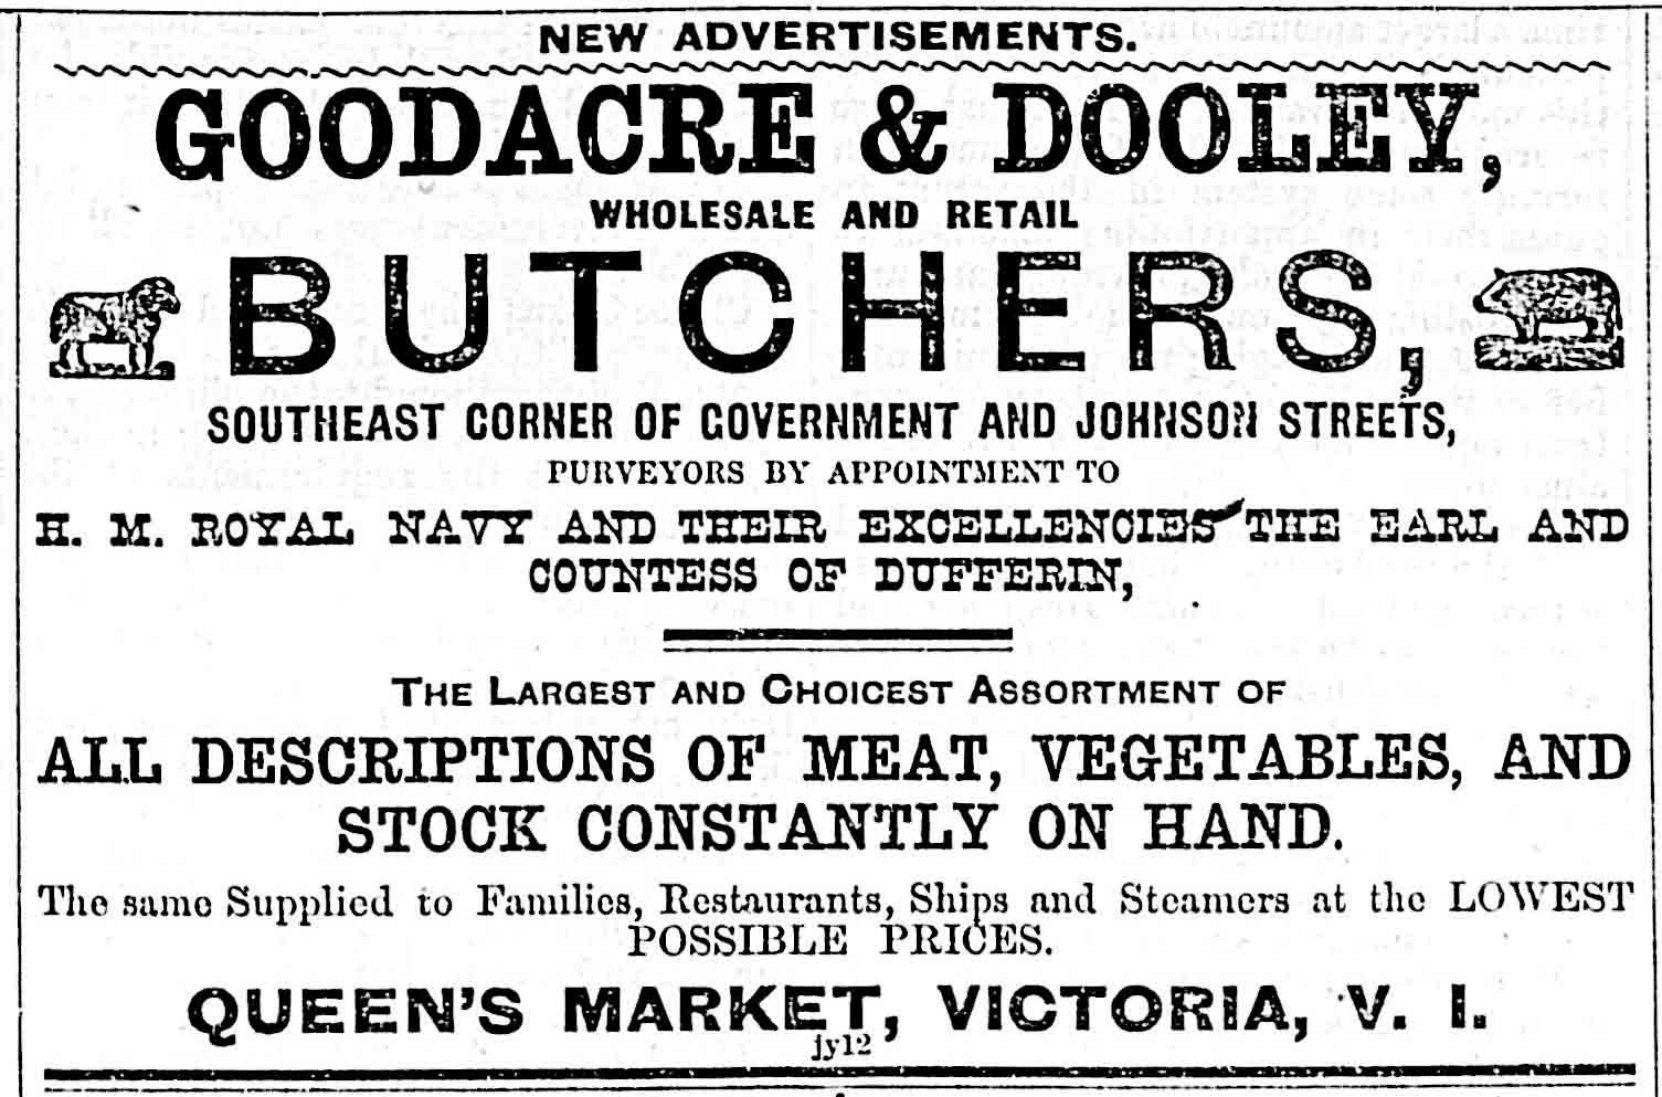 1879 advertisement for Goodacre & Dooley Butchers, at the south east corner of Government Street and Johnson Street